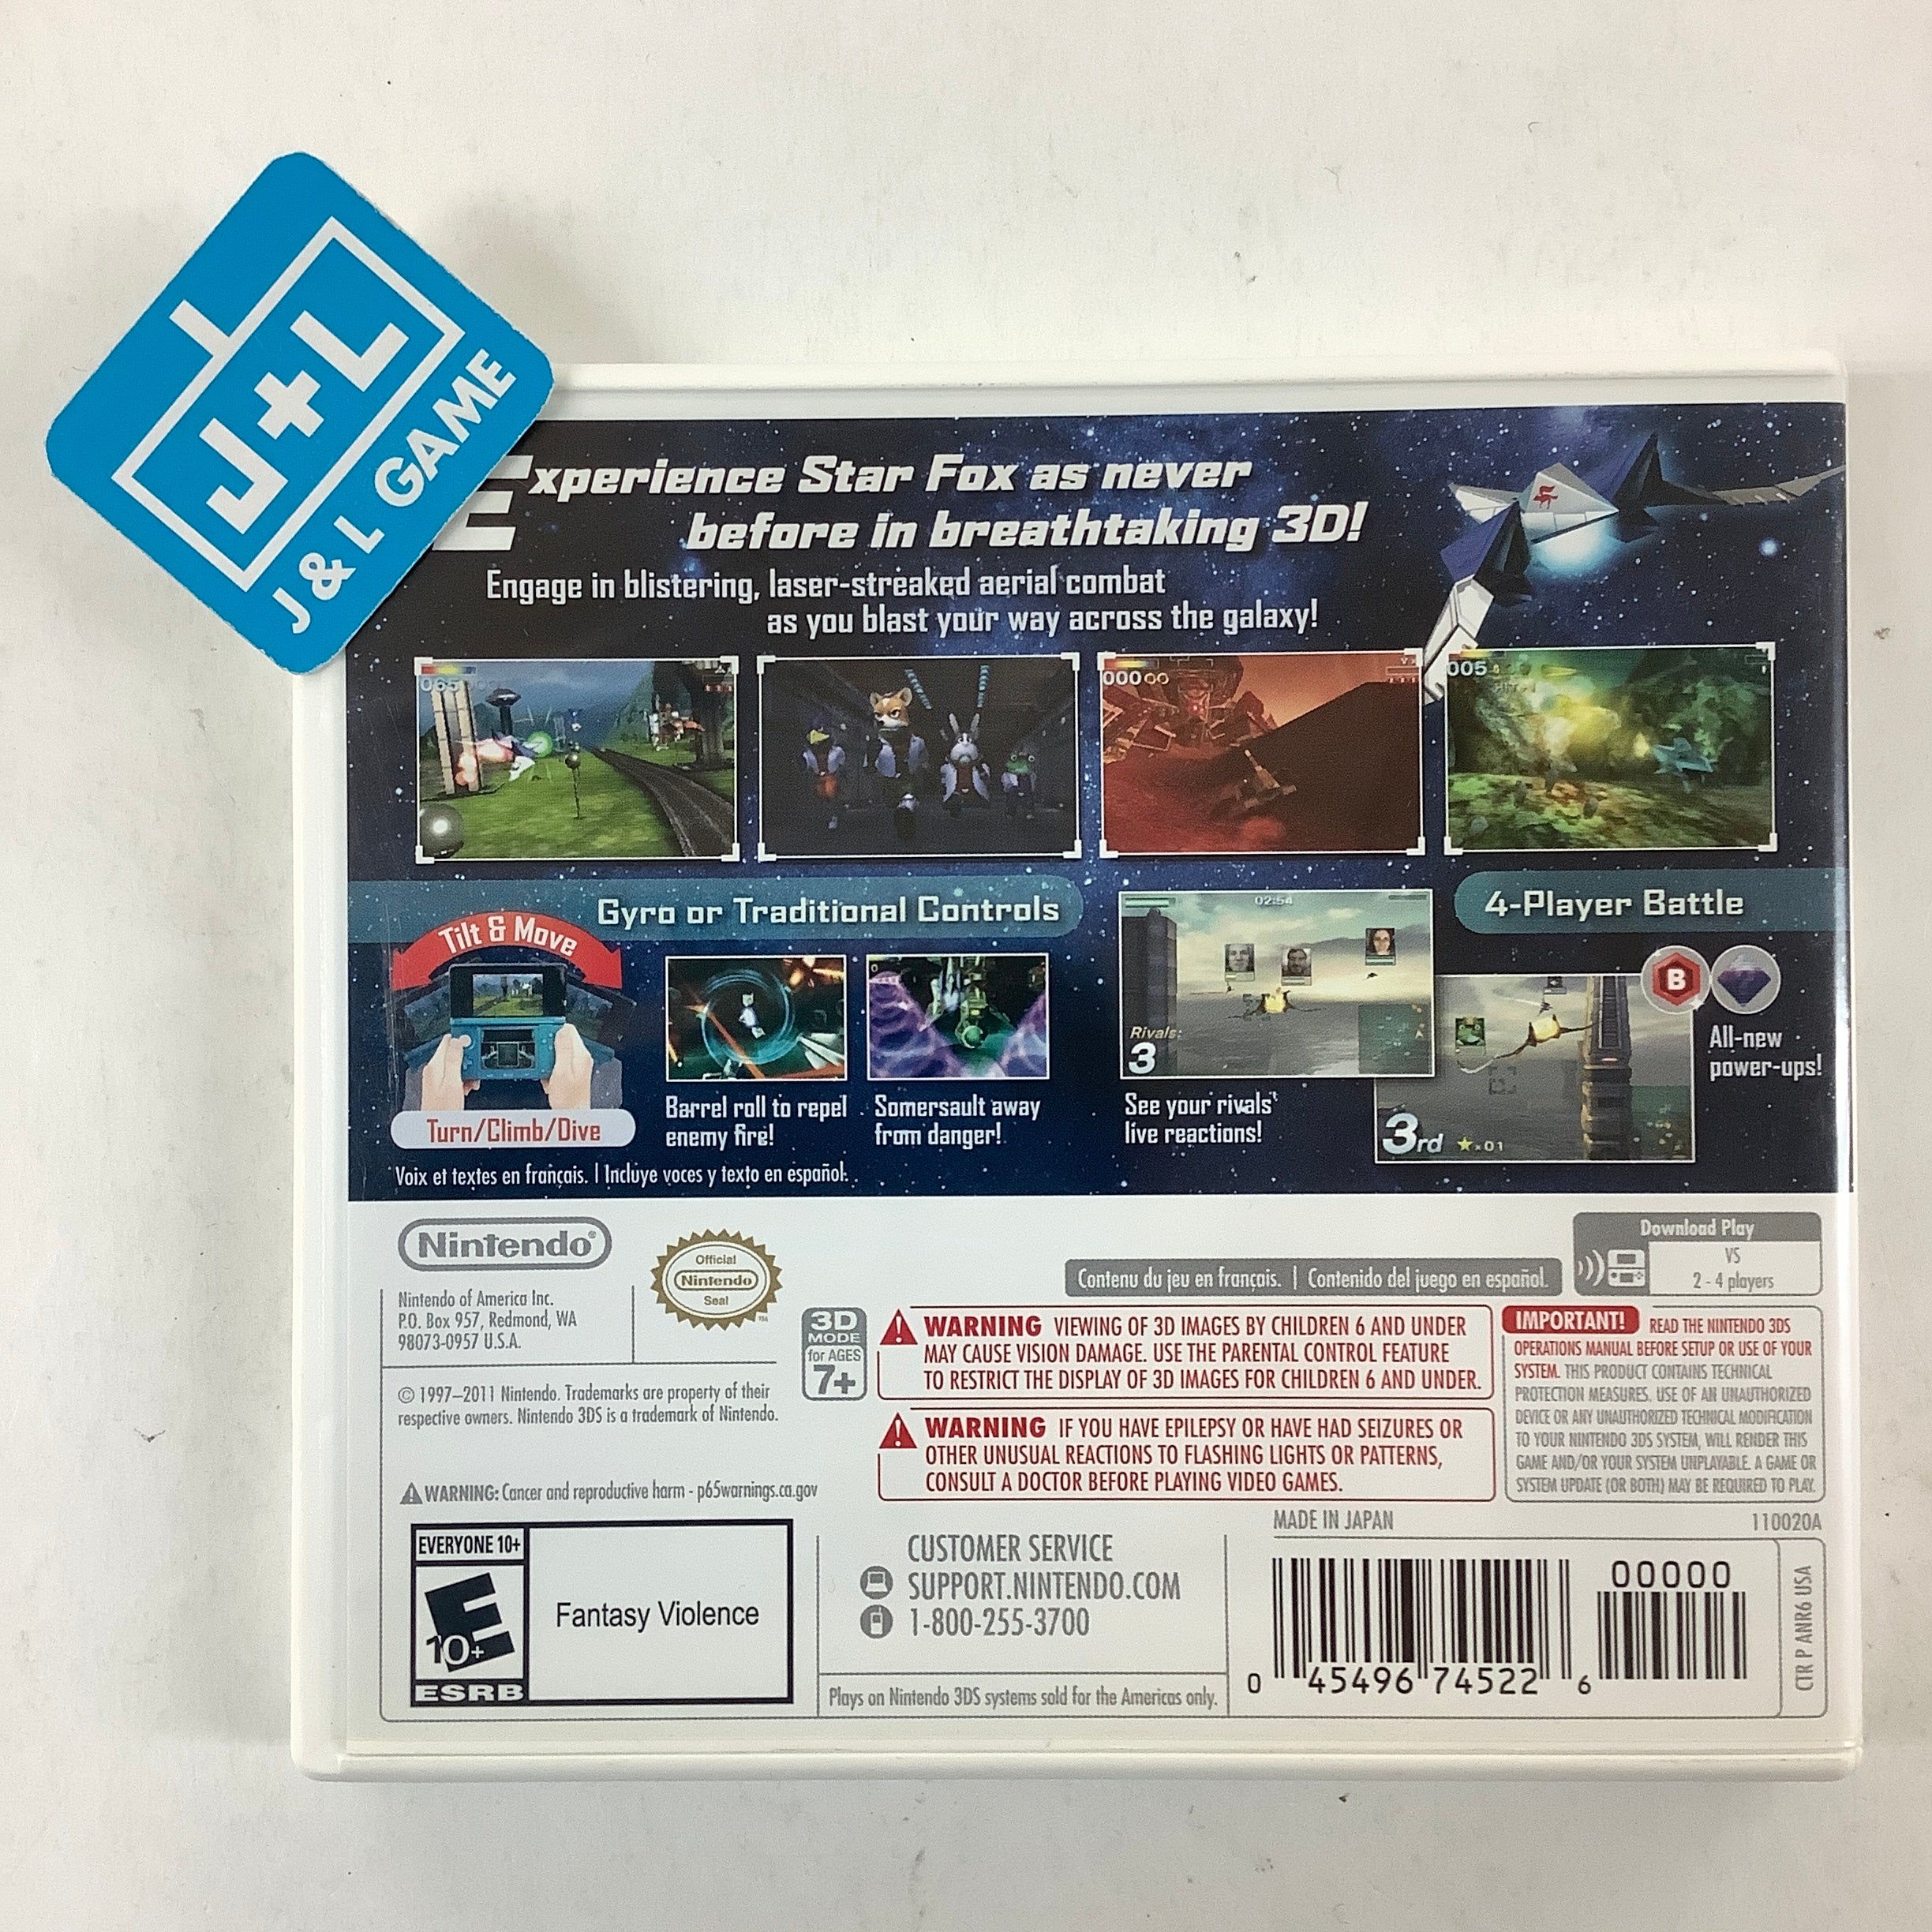 Star Fox 64 3D (Nintendo Selects) - Nintendo 3DS [Pre-Owned] Video Games Nintendo   